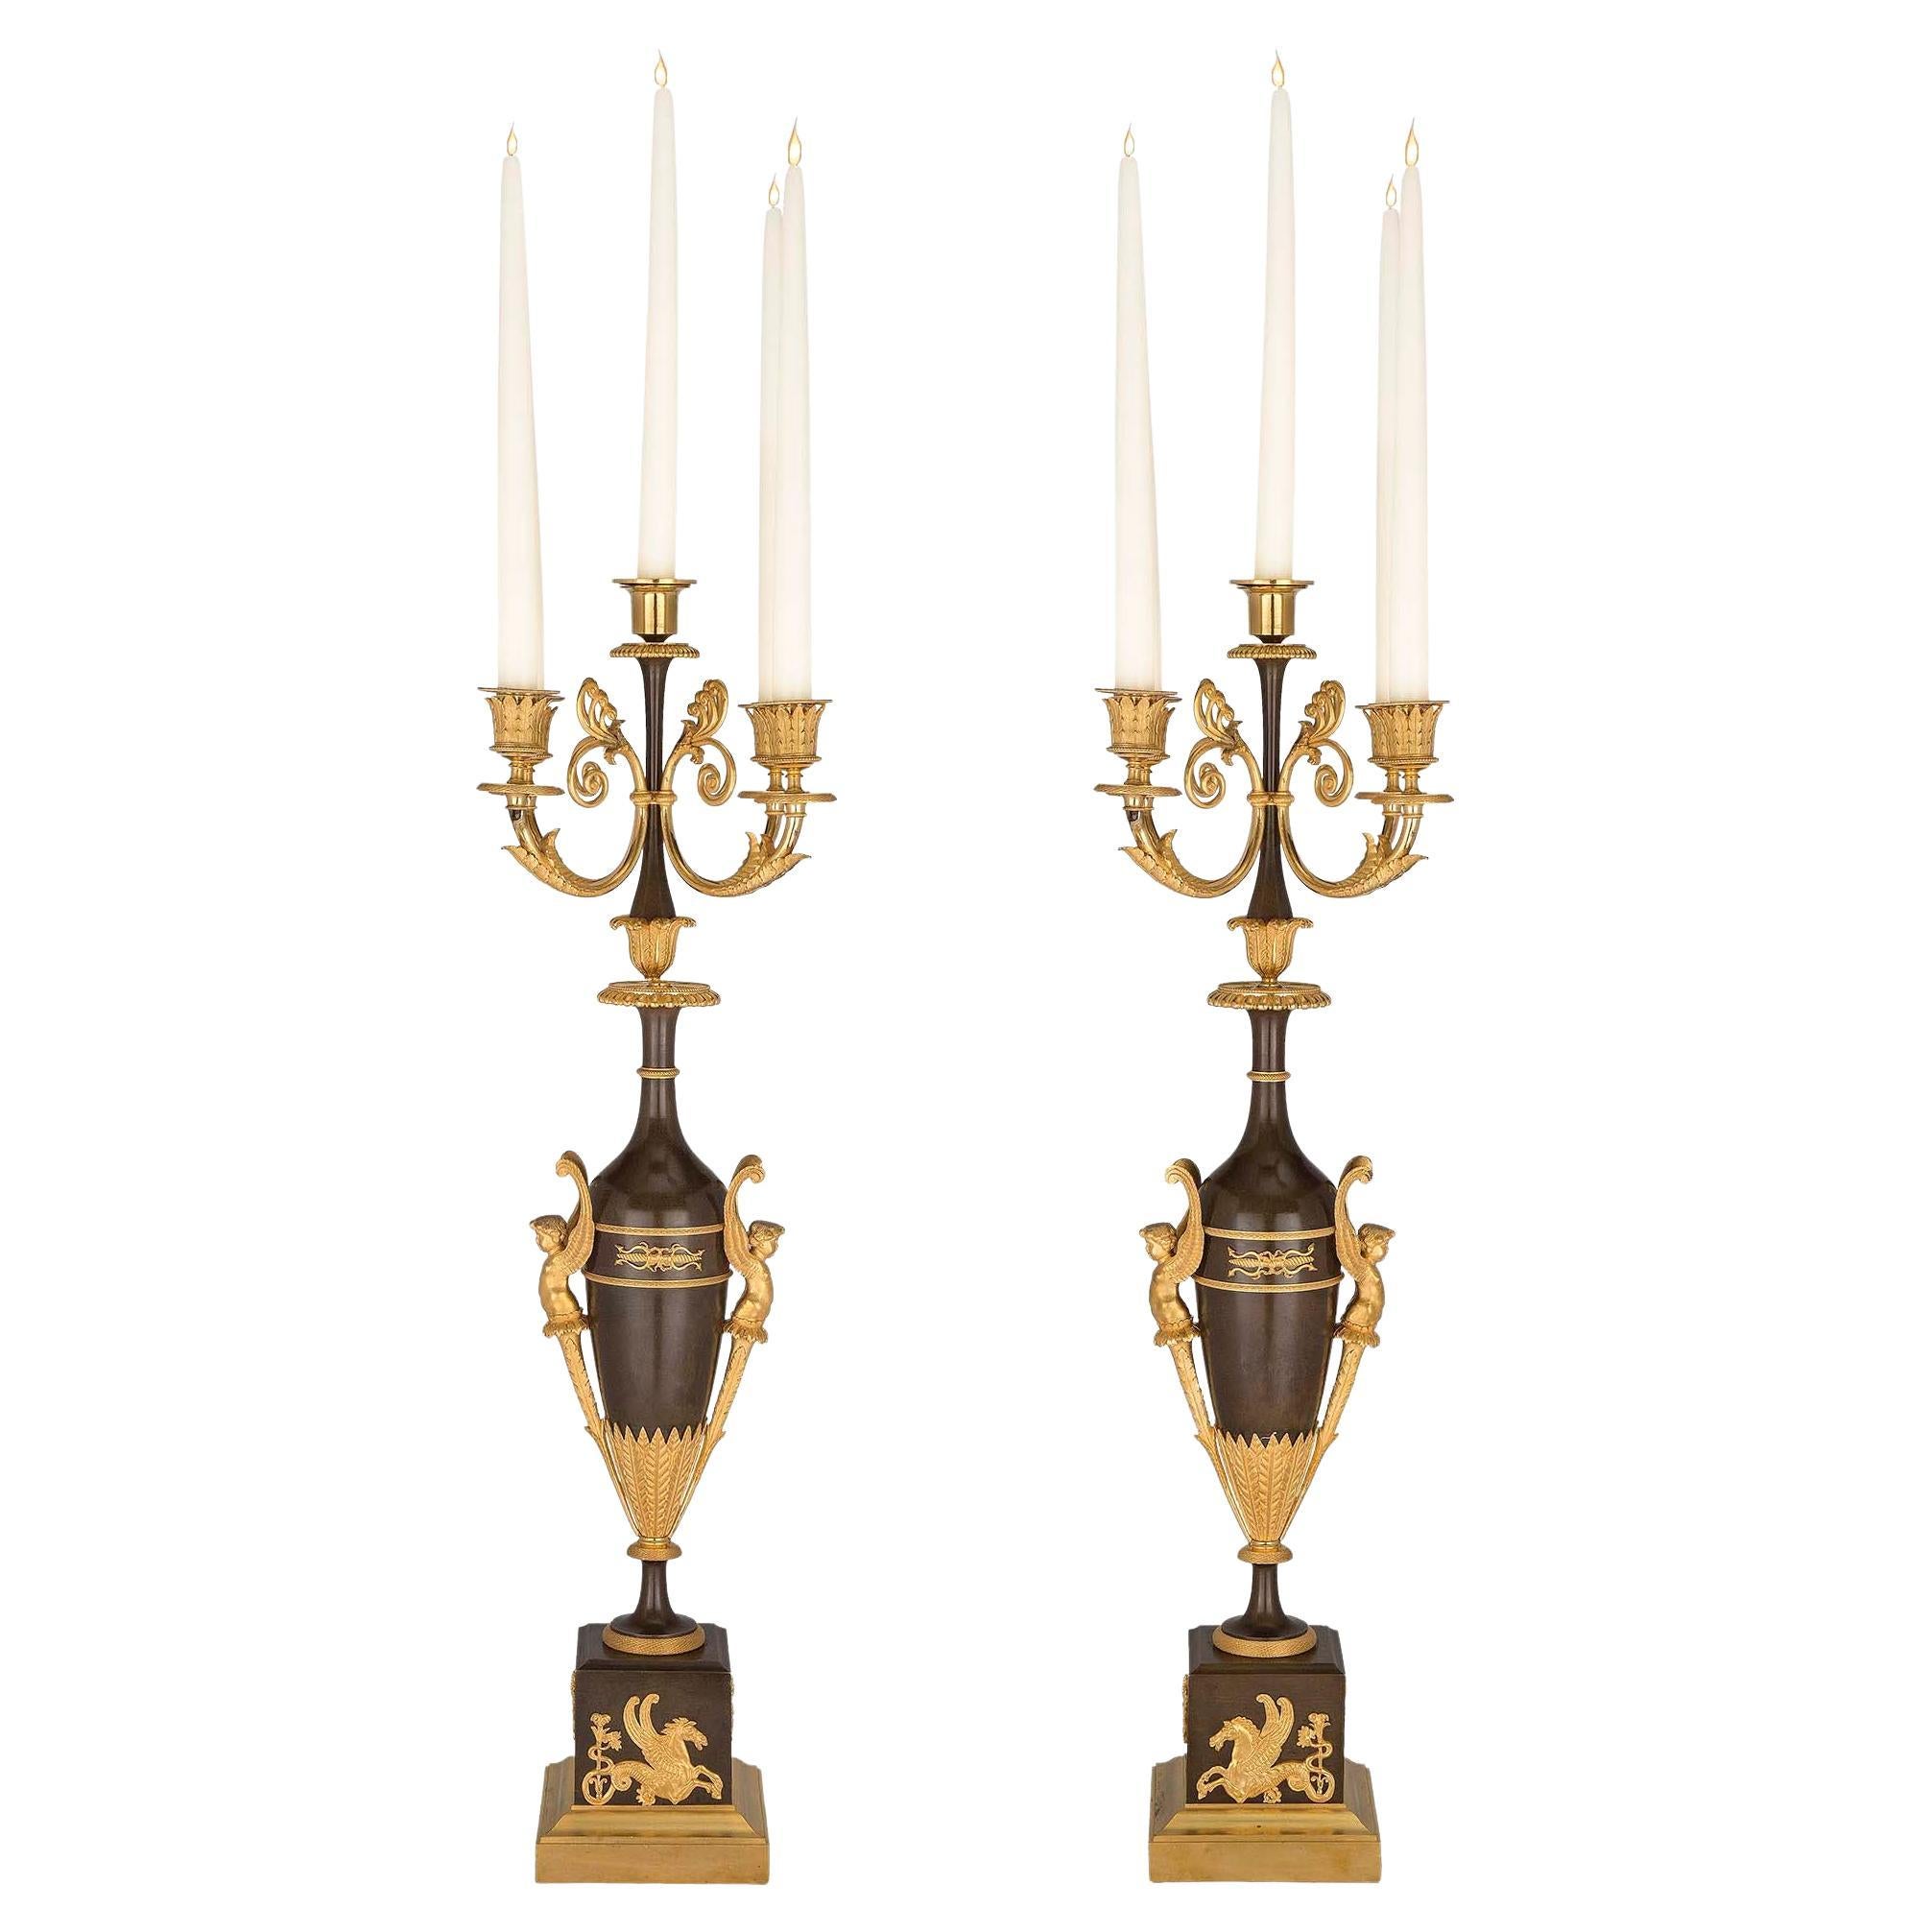 Pair of French 19th Century First Empire Period Bronze and Ormolu Candelabras